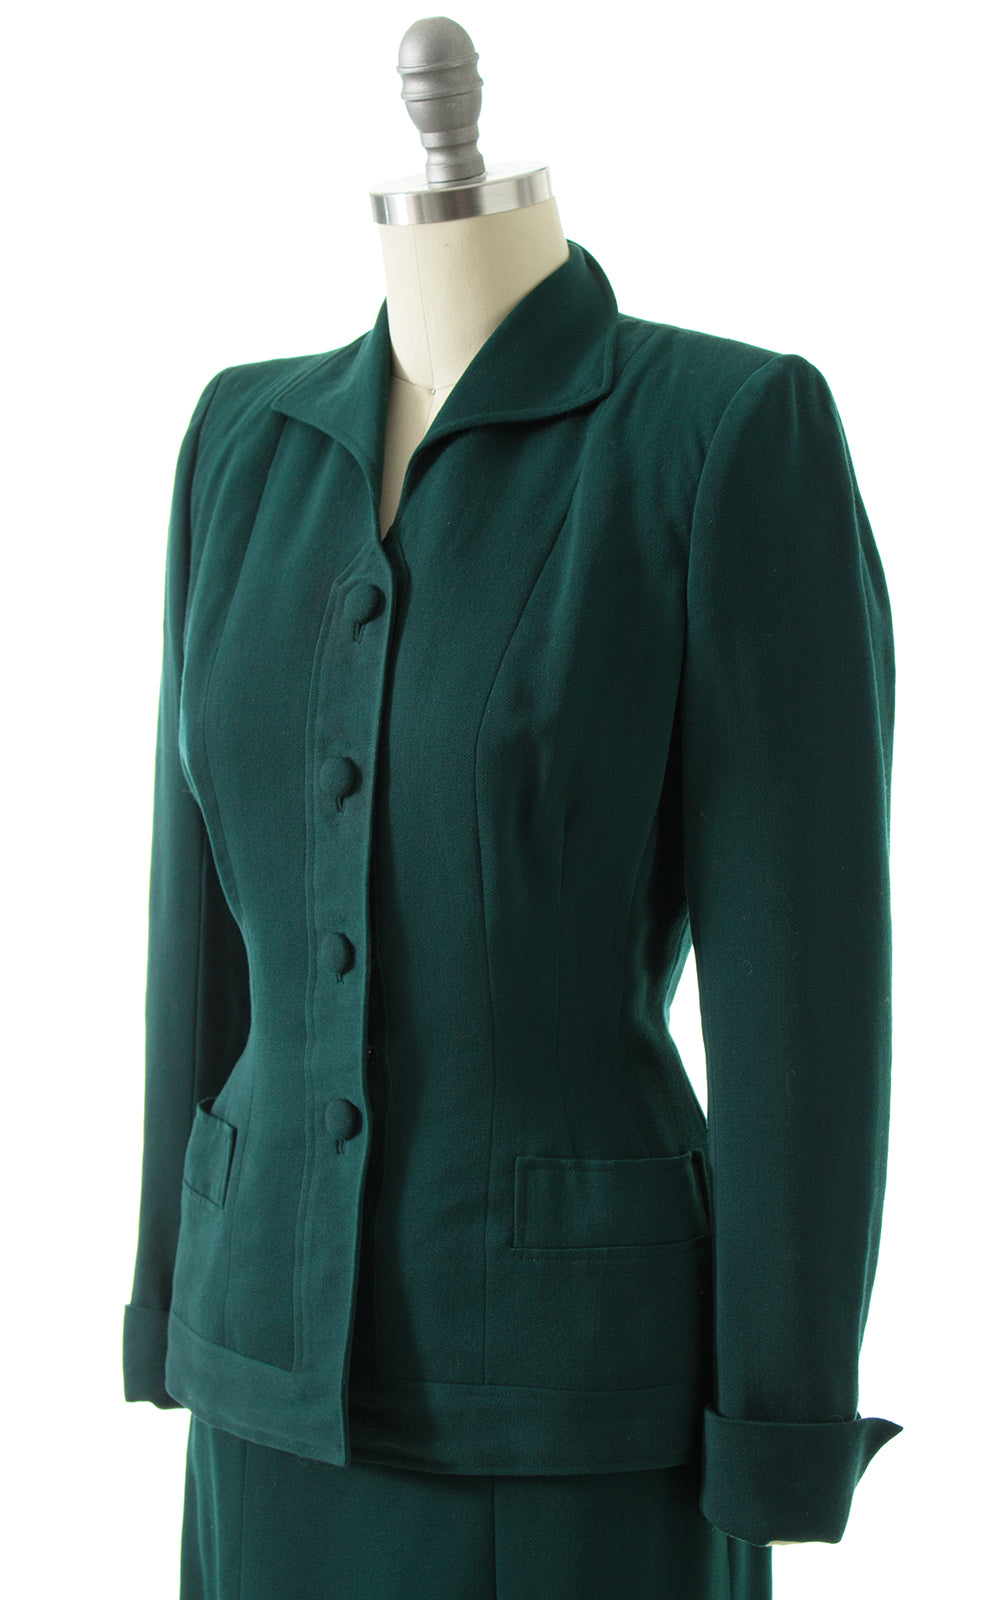 1940s Forest Green Wool Skirt Suit